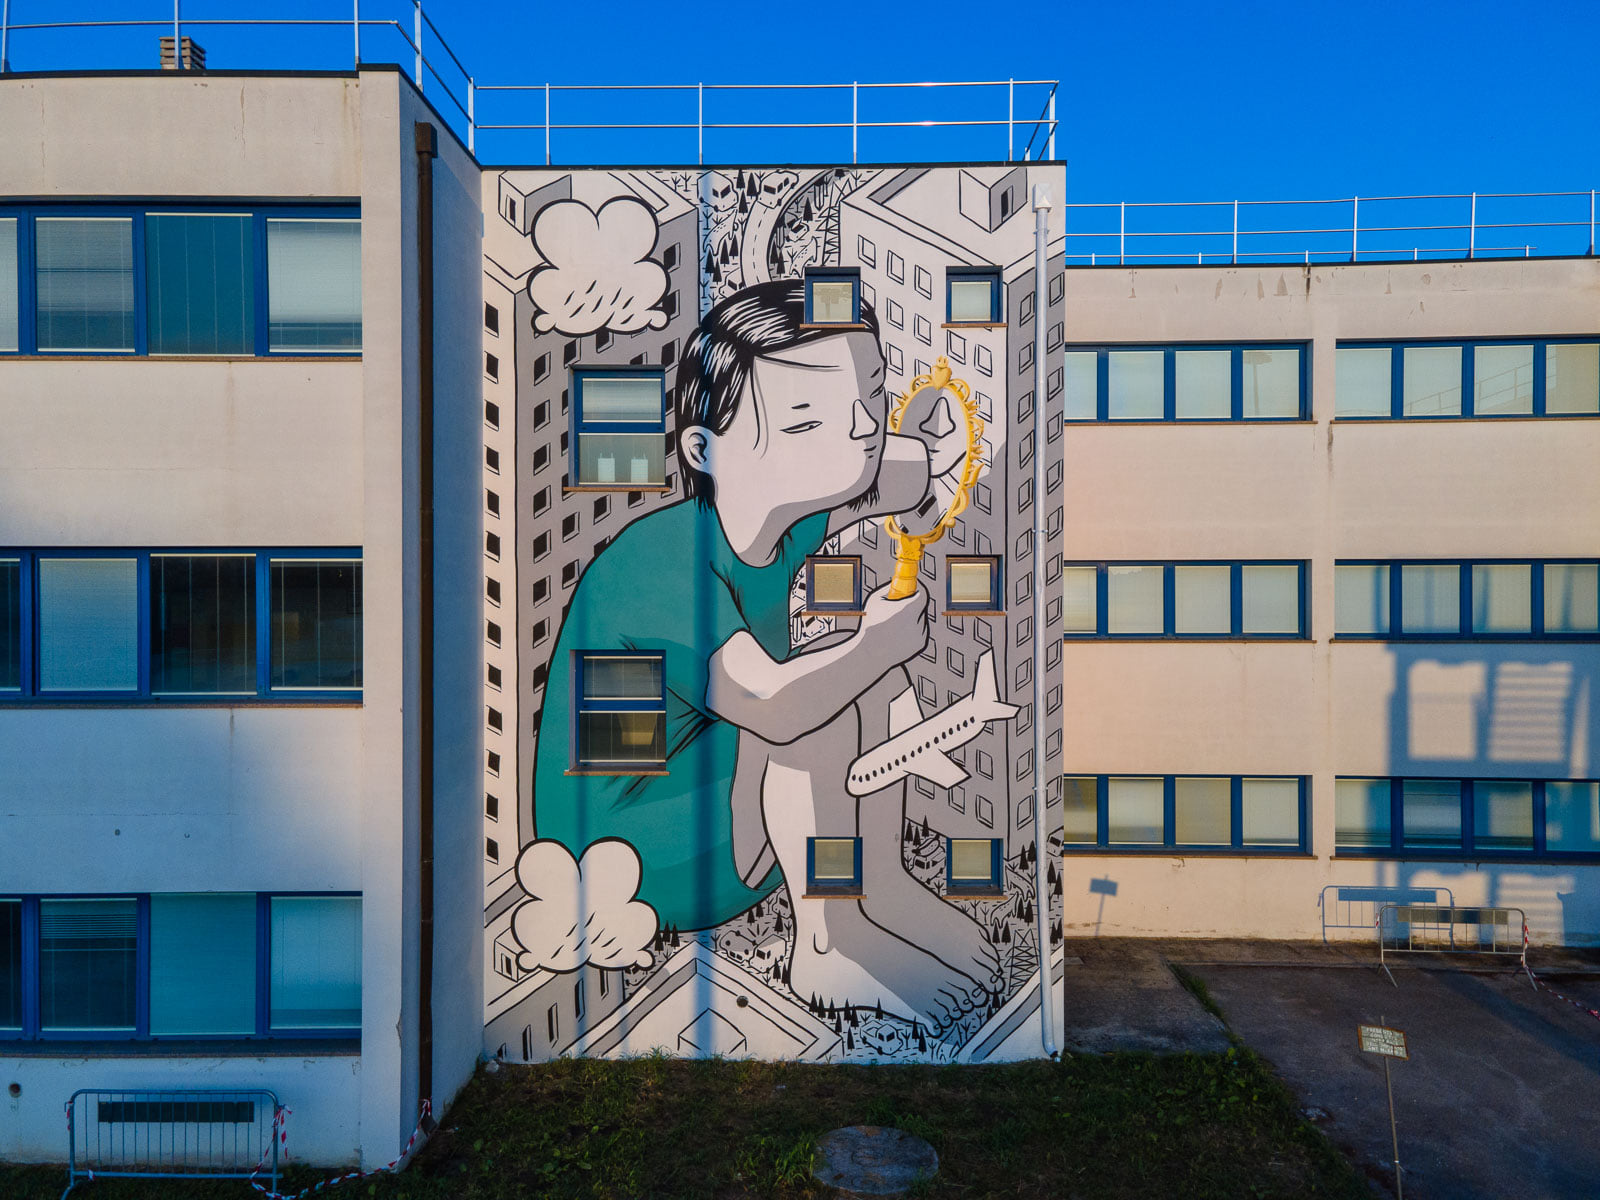 Mirror by Millo